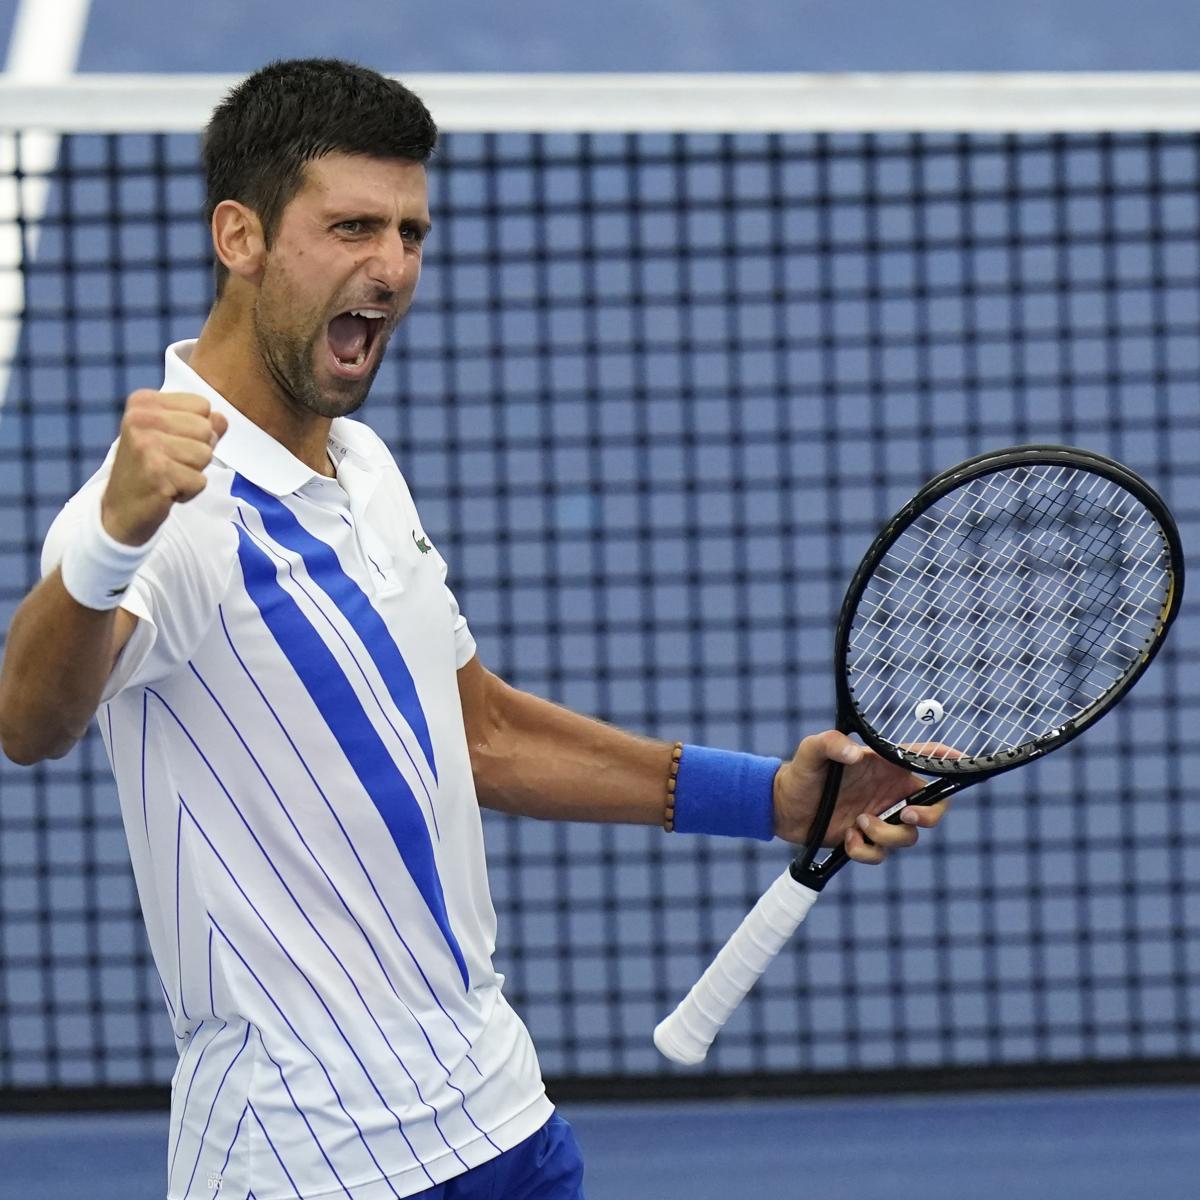 US Open Tennis 2020 Bracket Predictions, Odds for Top Players, Prize